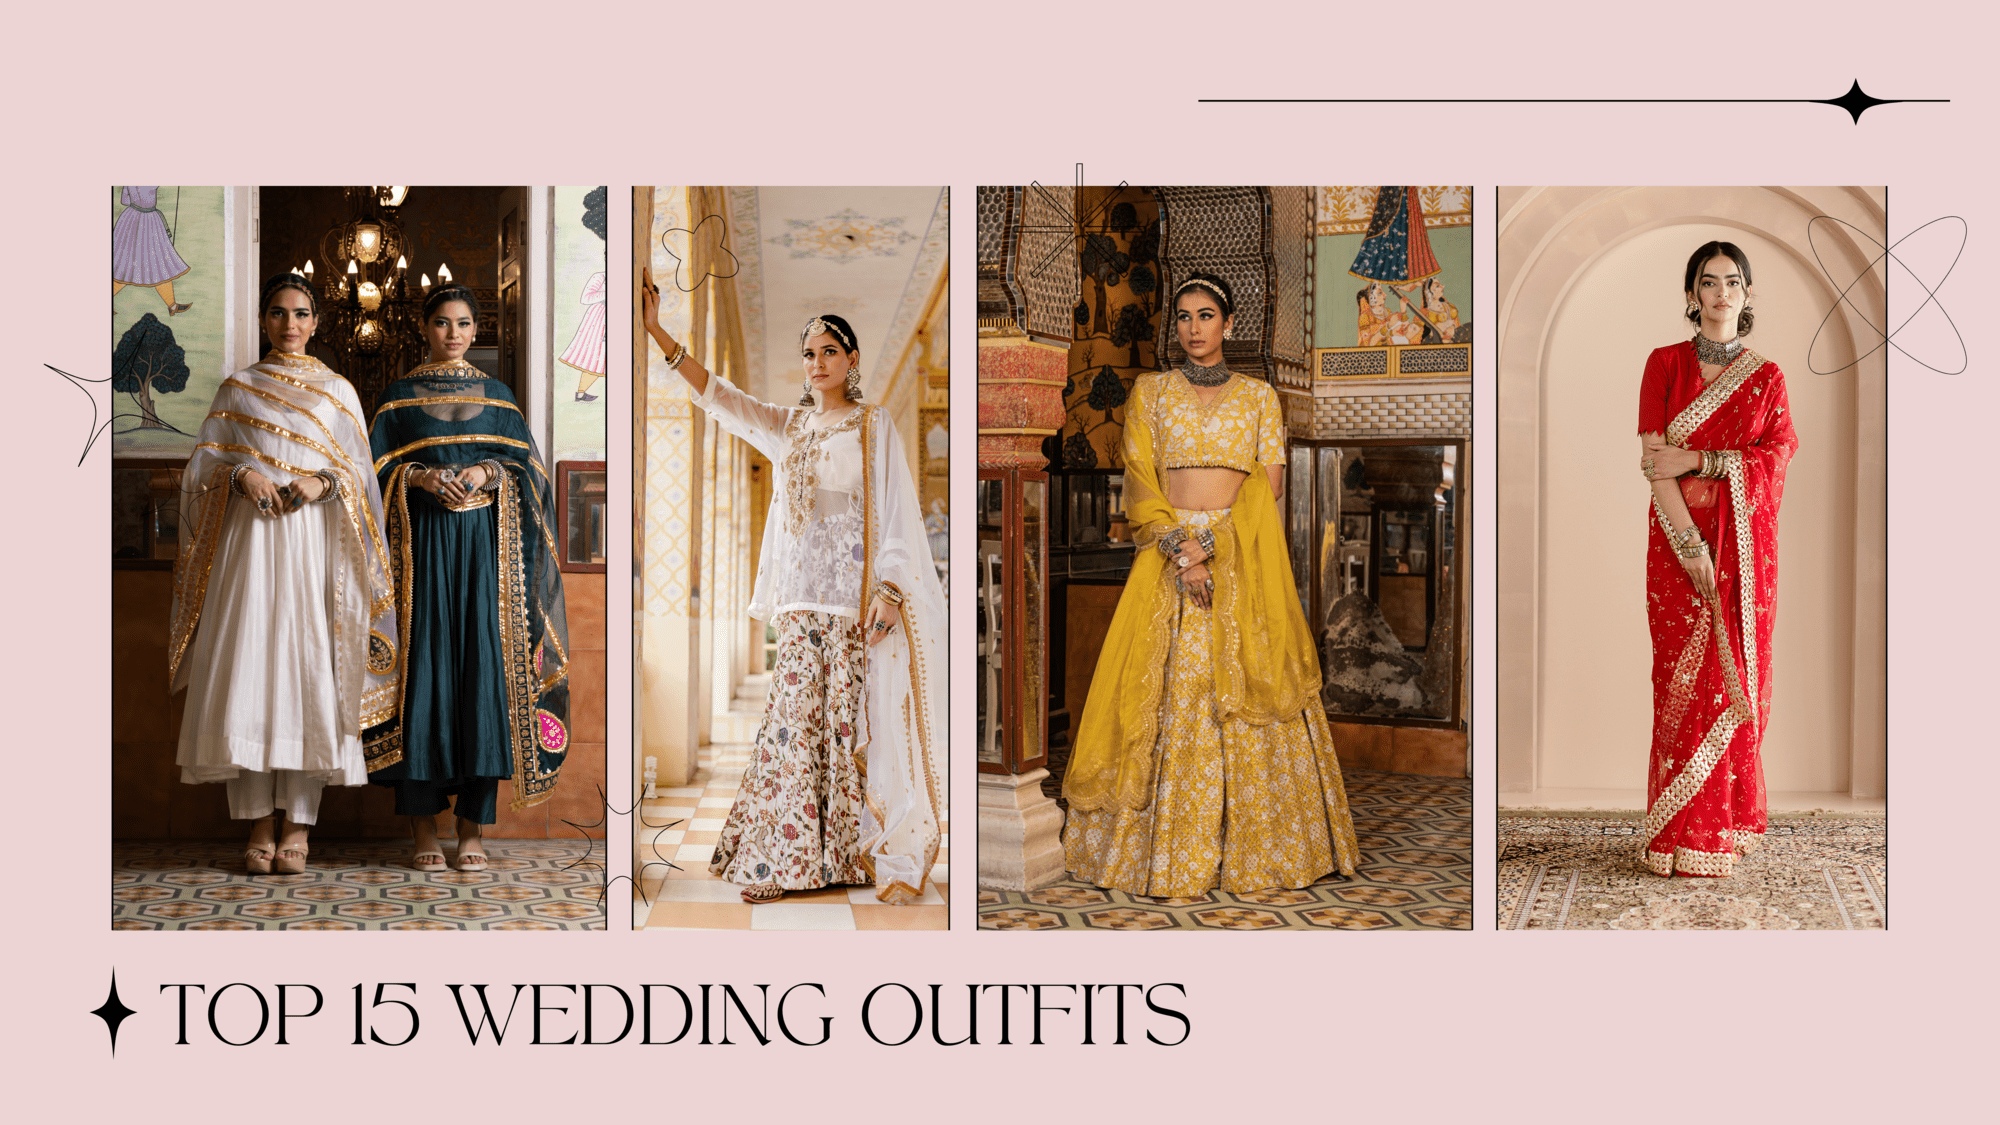 TOP 15 WEDDING OUTFITS